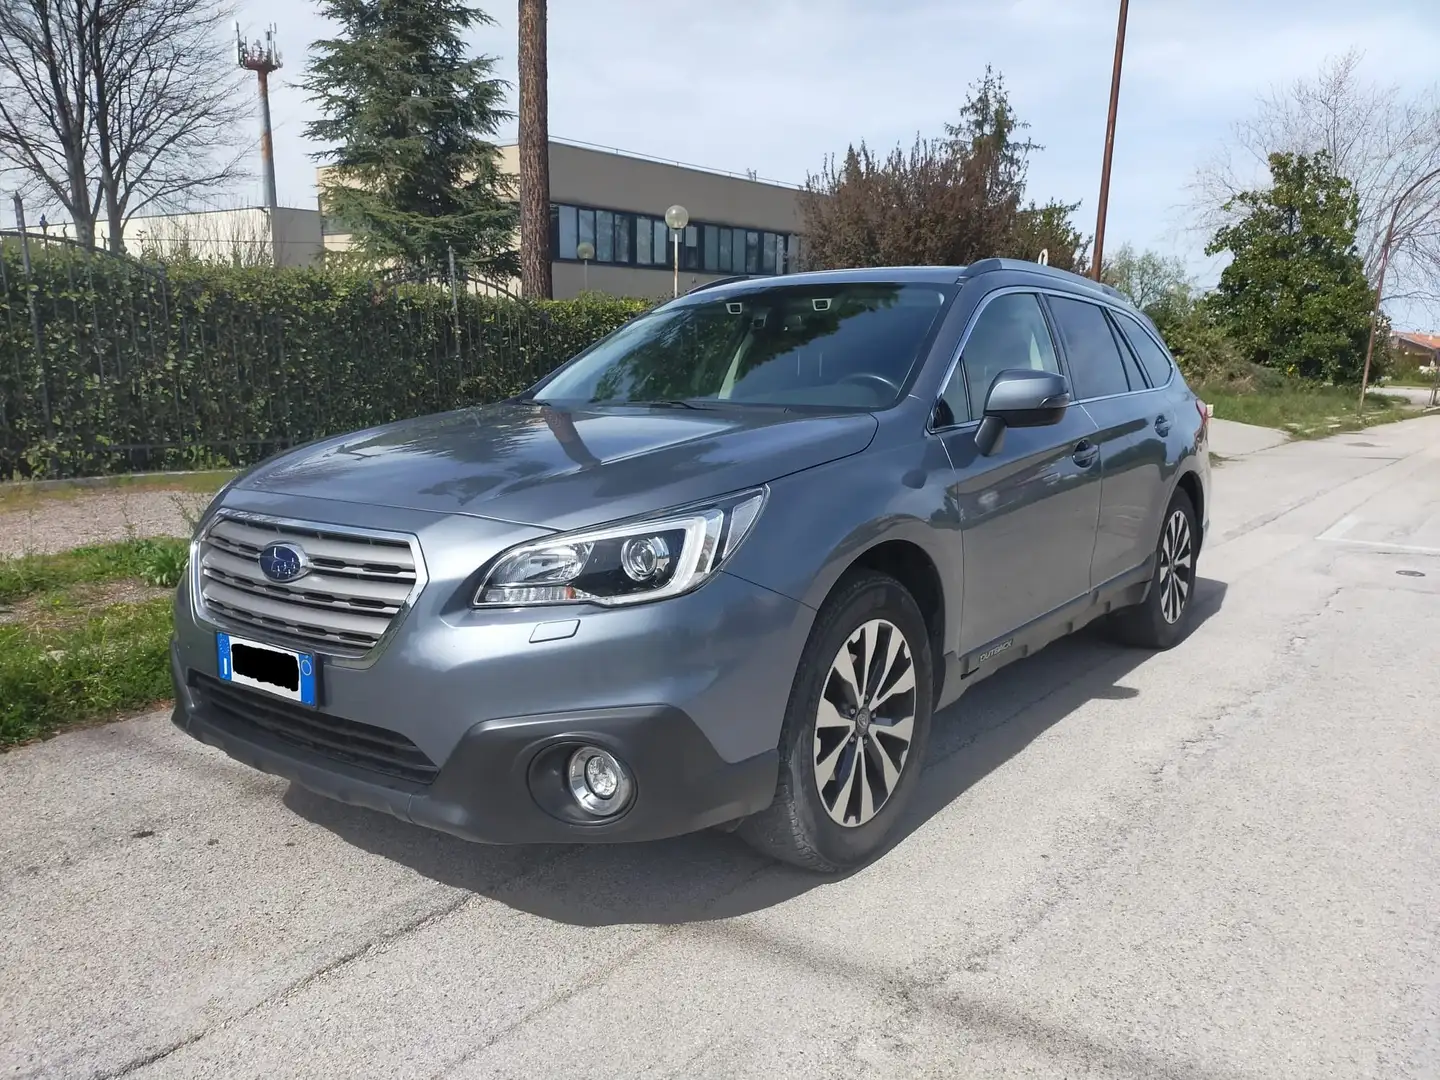 Subaru OUTBACK Outback 2.5i Unlimited lineartronic my16 - 1